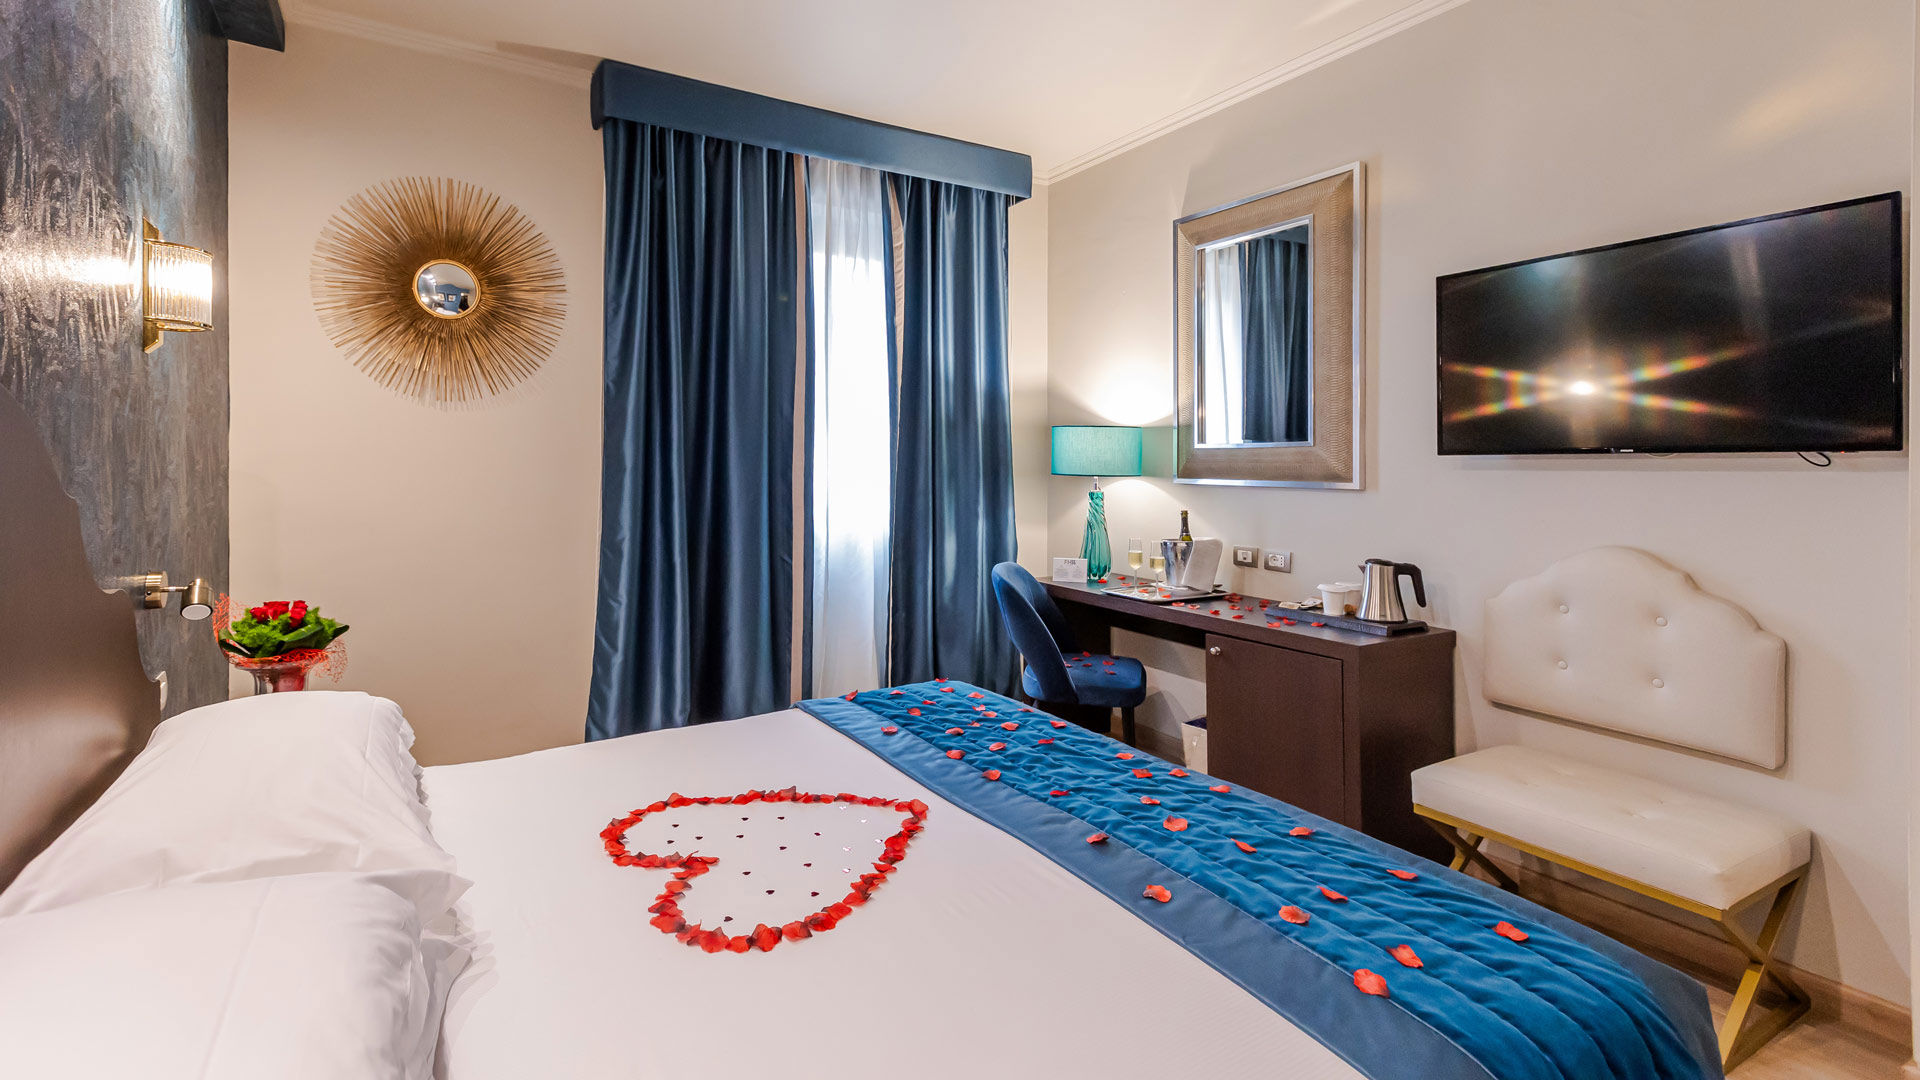 FH55 Hotels - Valentine’s Day in Rome offers 1